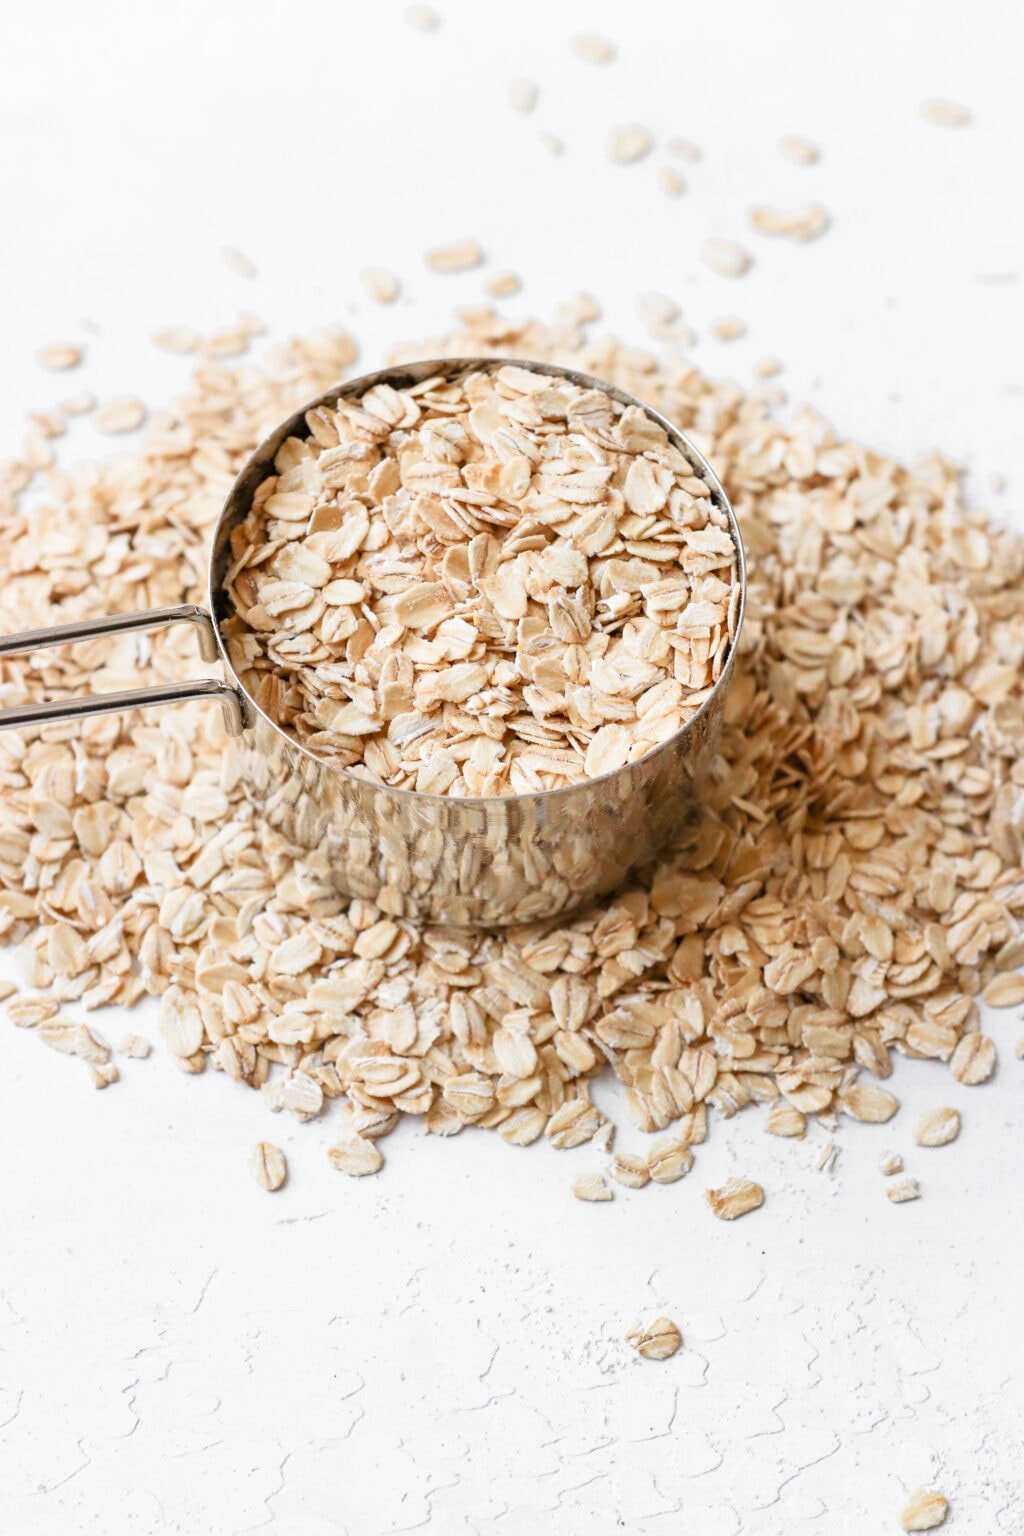 A silver 250 mL measuring cup is filled to the brim with quick oats. There are quick oats on the counter spilling over surrounding the measuring cup.